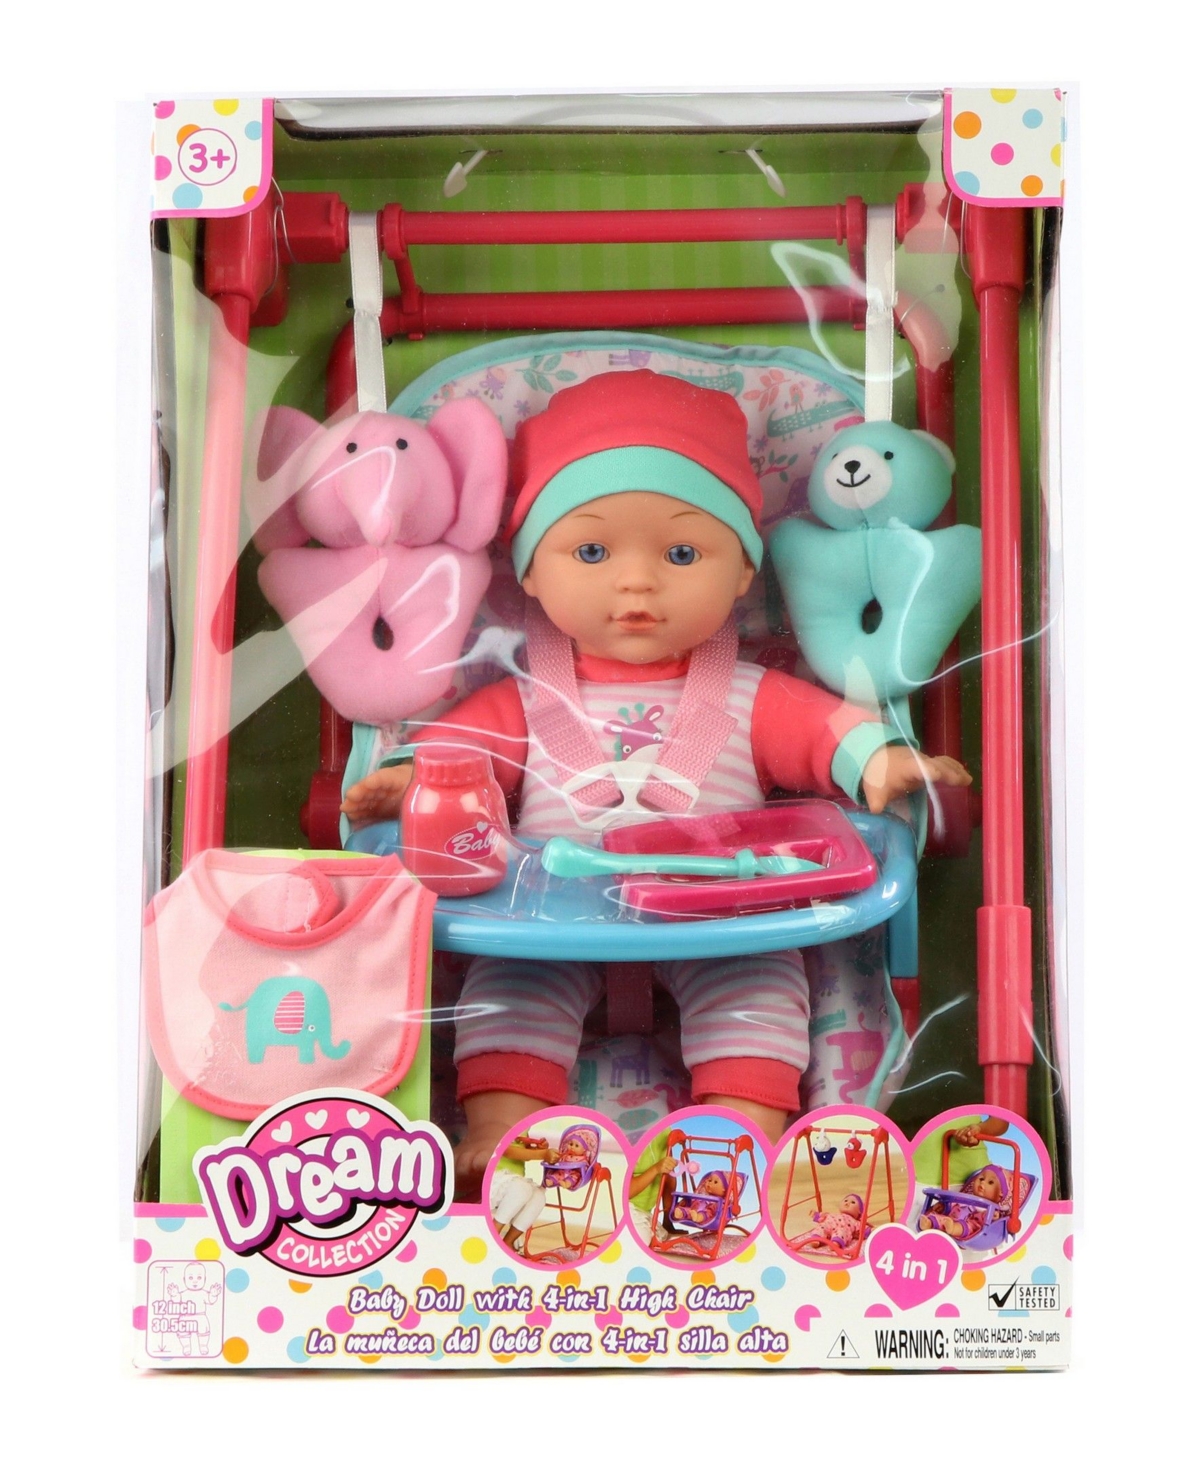 Redbox Dream Collection 12" Baby Doll 4-in-1 High Chair Play Set In Multi